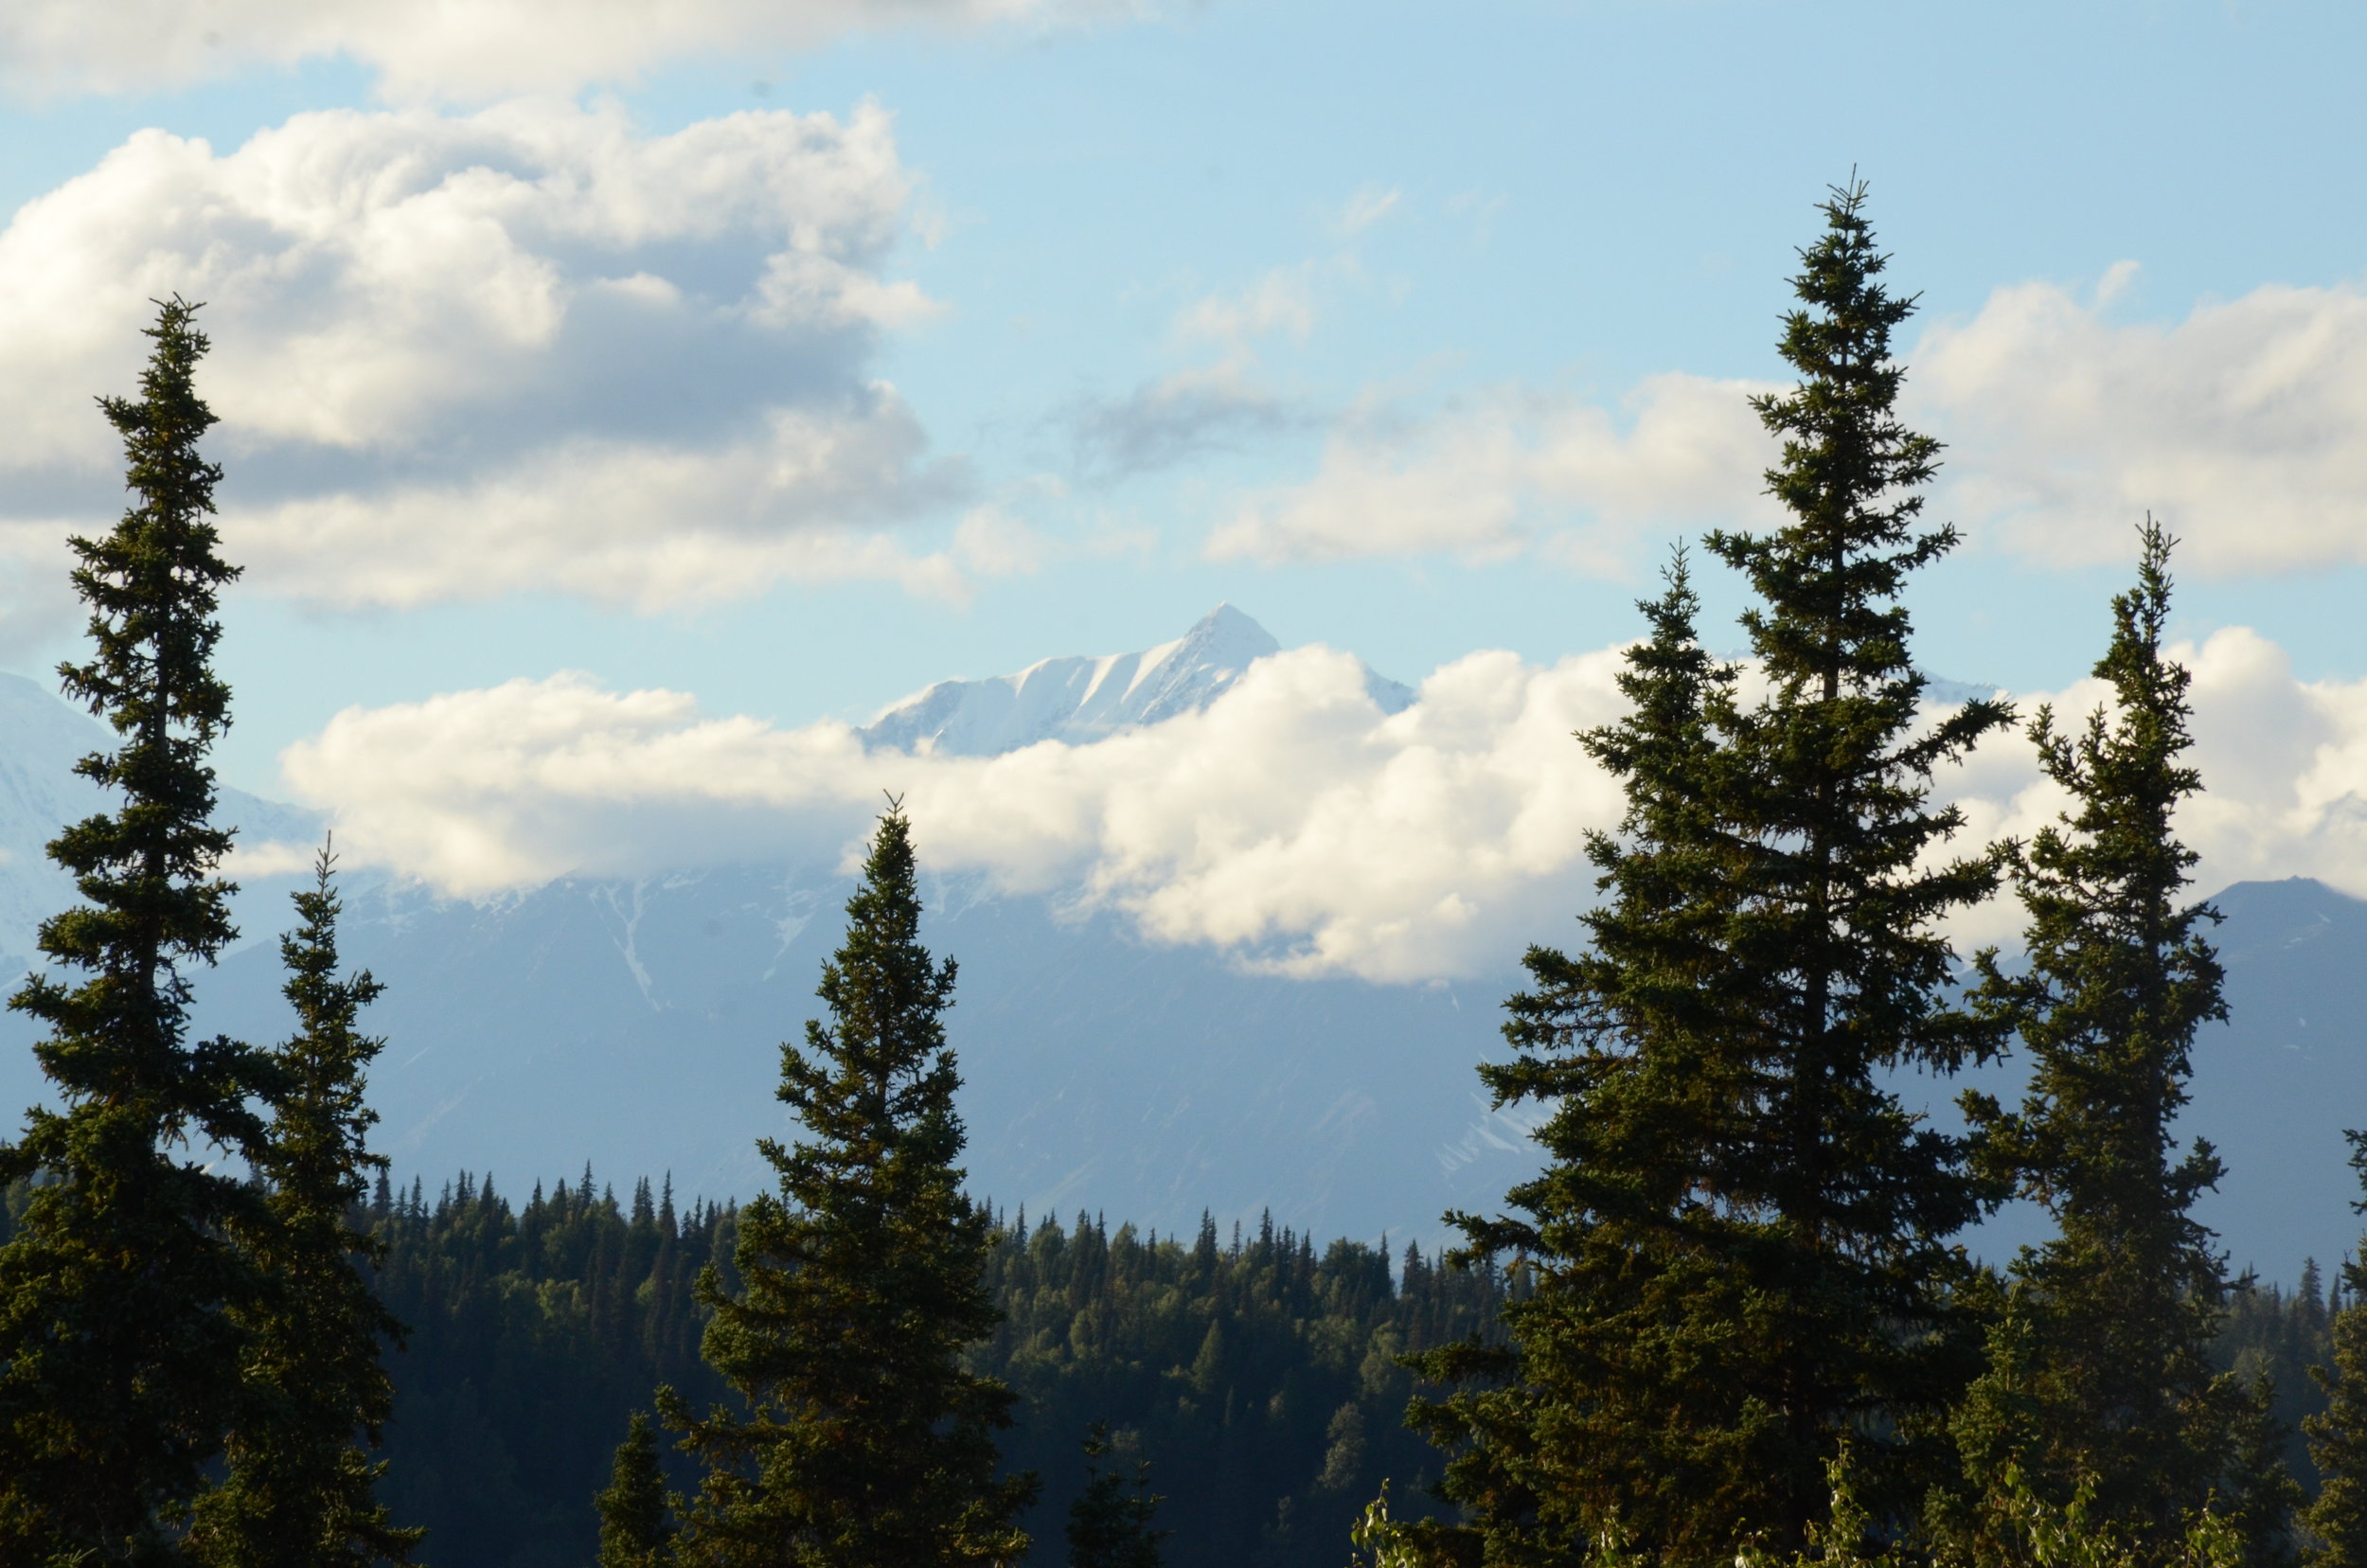  The clouds part, briefly, to reveal Denali. The 20,310-foot mountain creates its own weather, which keeps it hidden in clouds two days out of three, even in summer. 